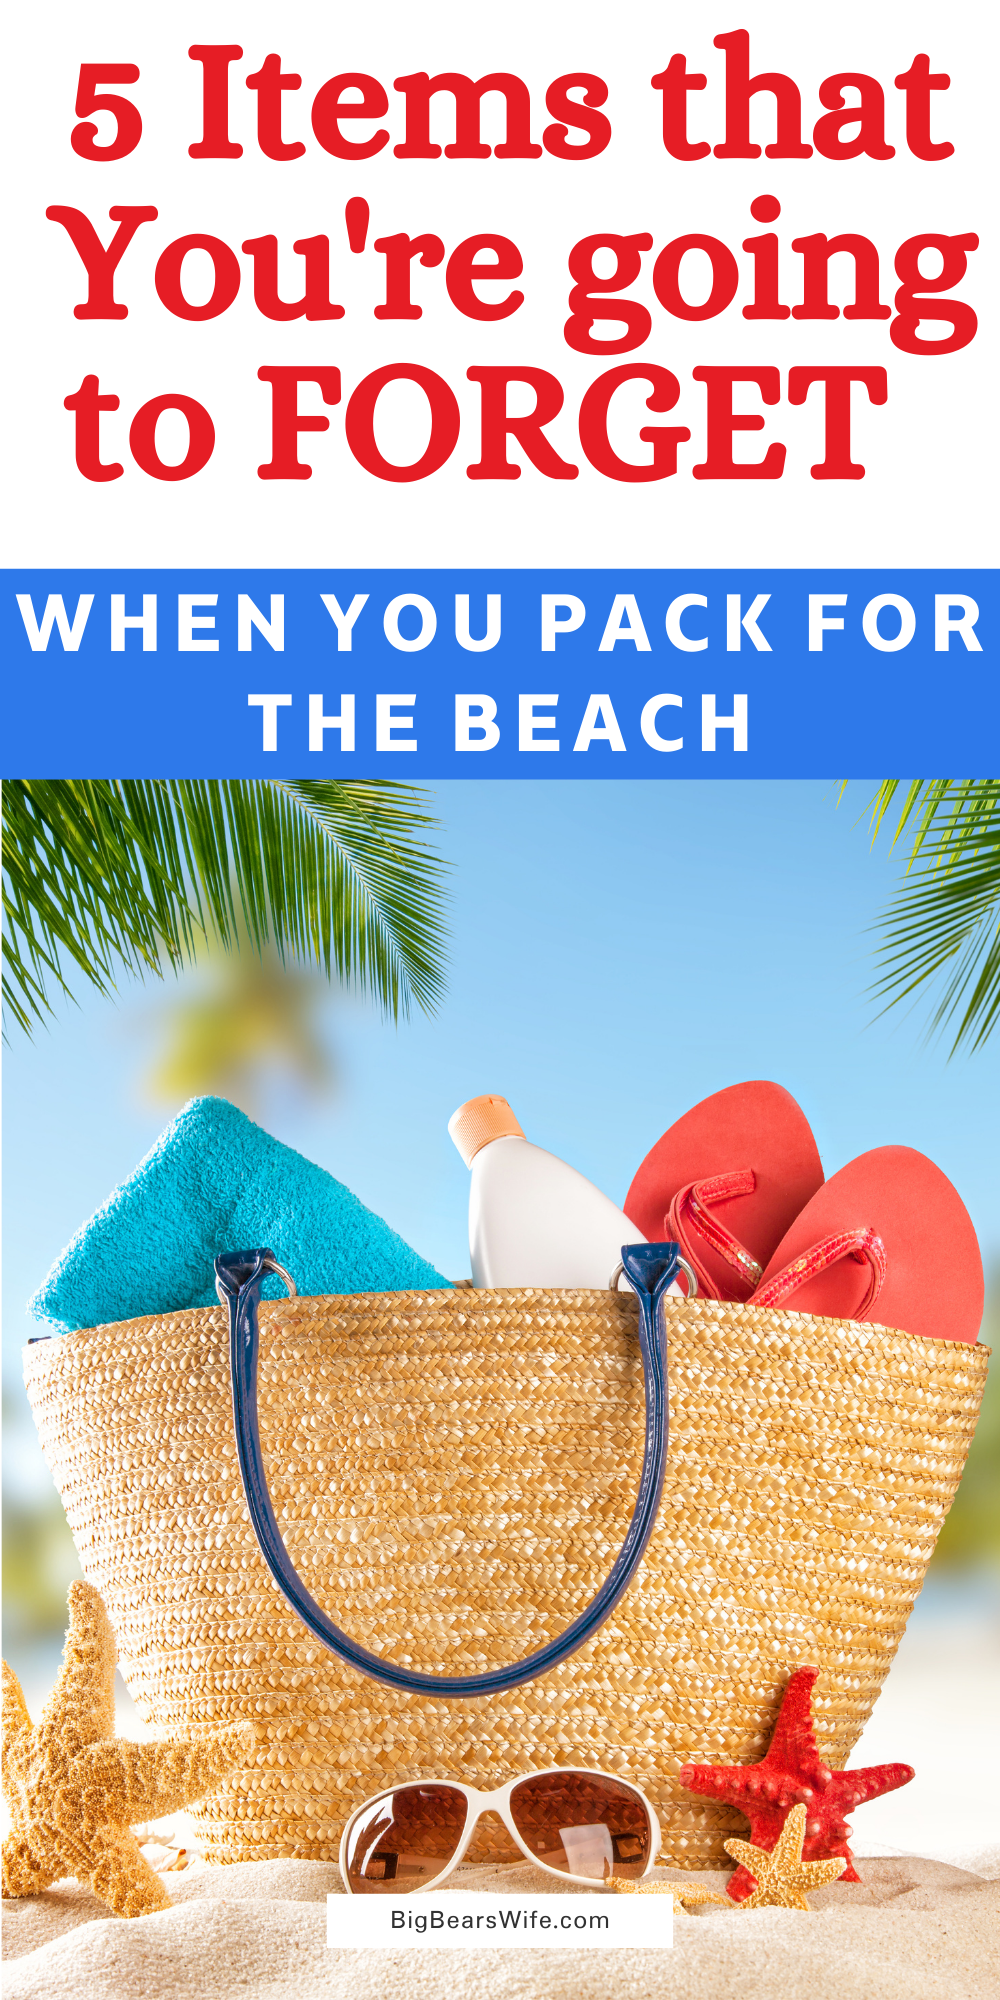 Are you wondering what to pack for the beach? Worried that you're going to forget something? Here are 5 Items that You're going to forget when you pack for the beach! via @bigbearswife